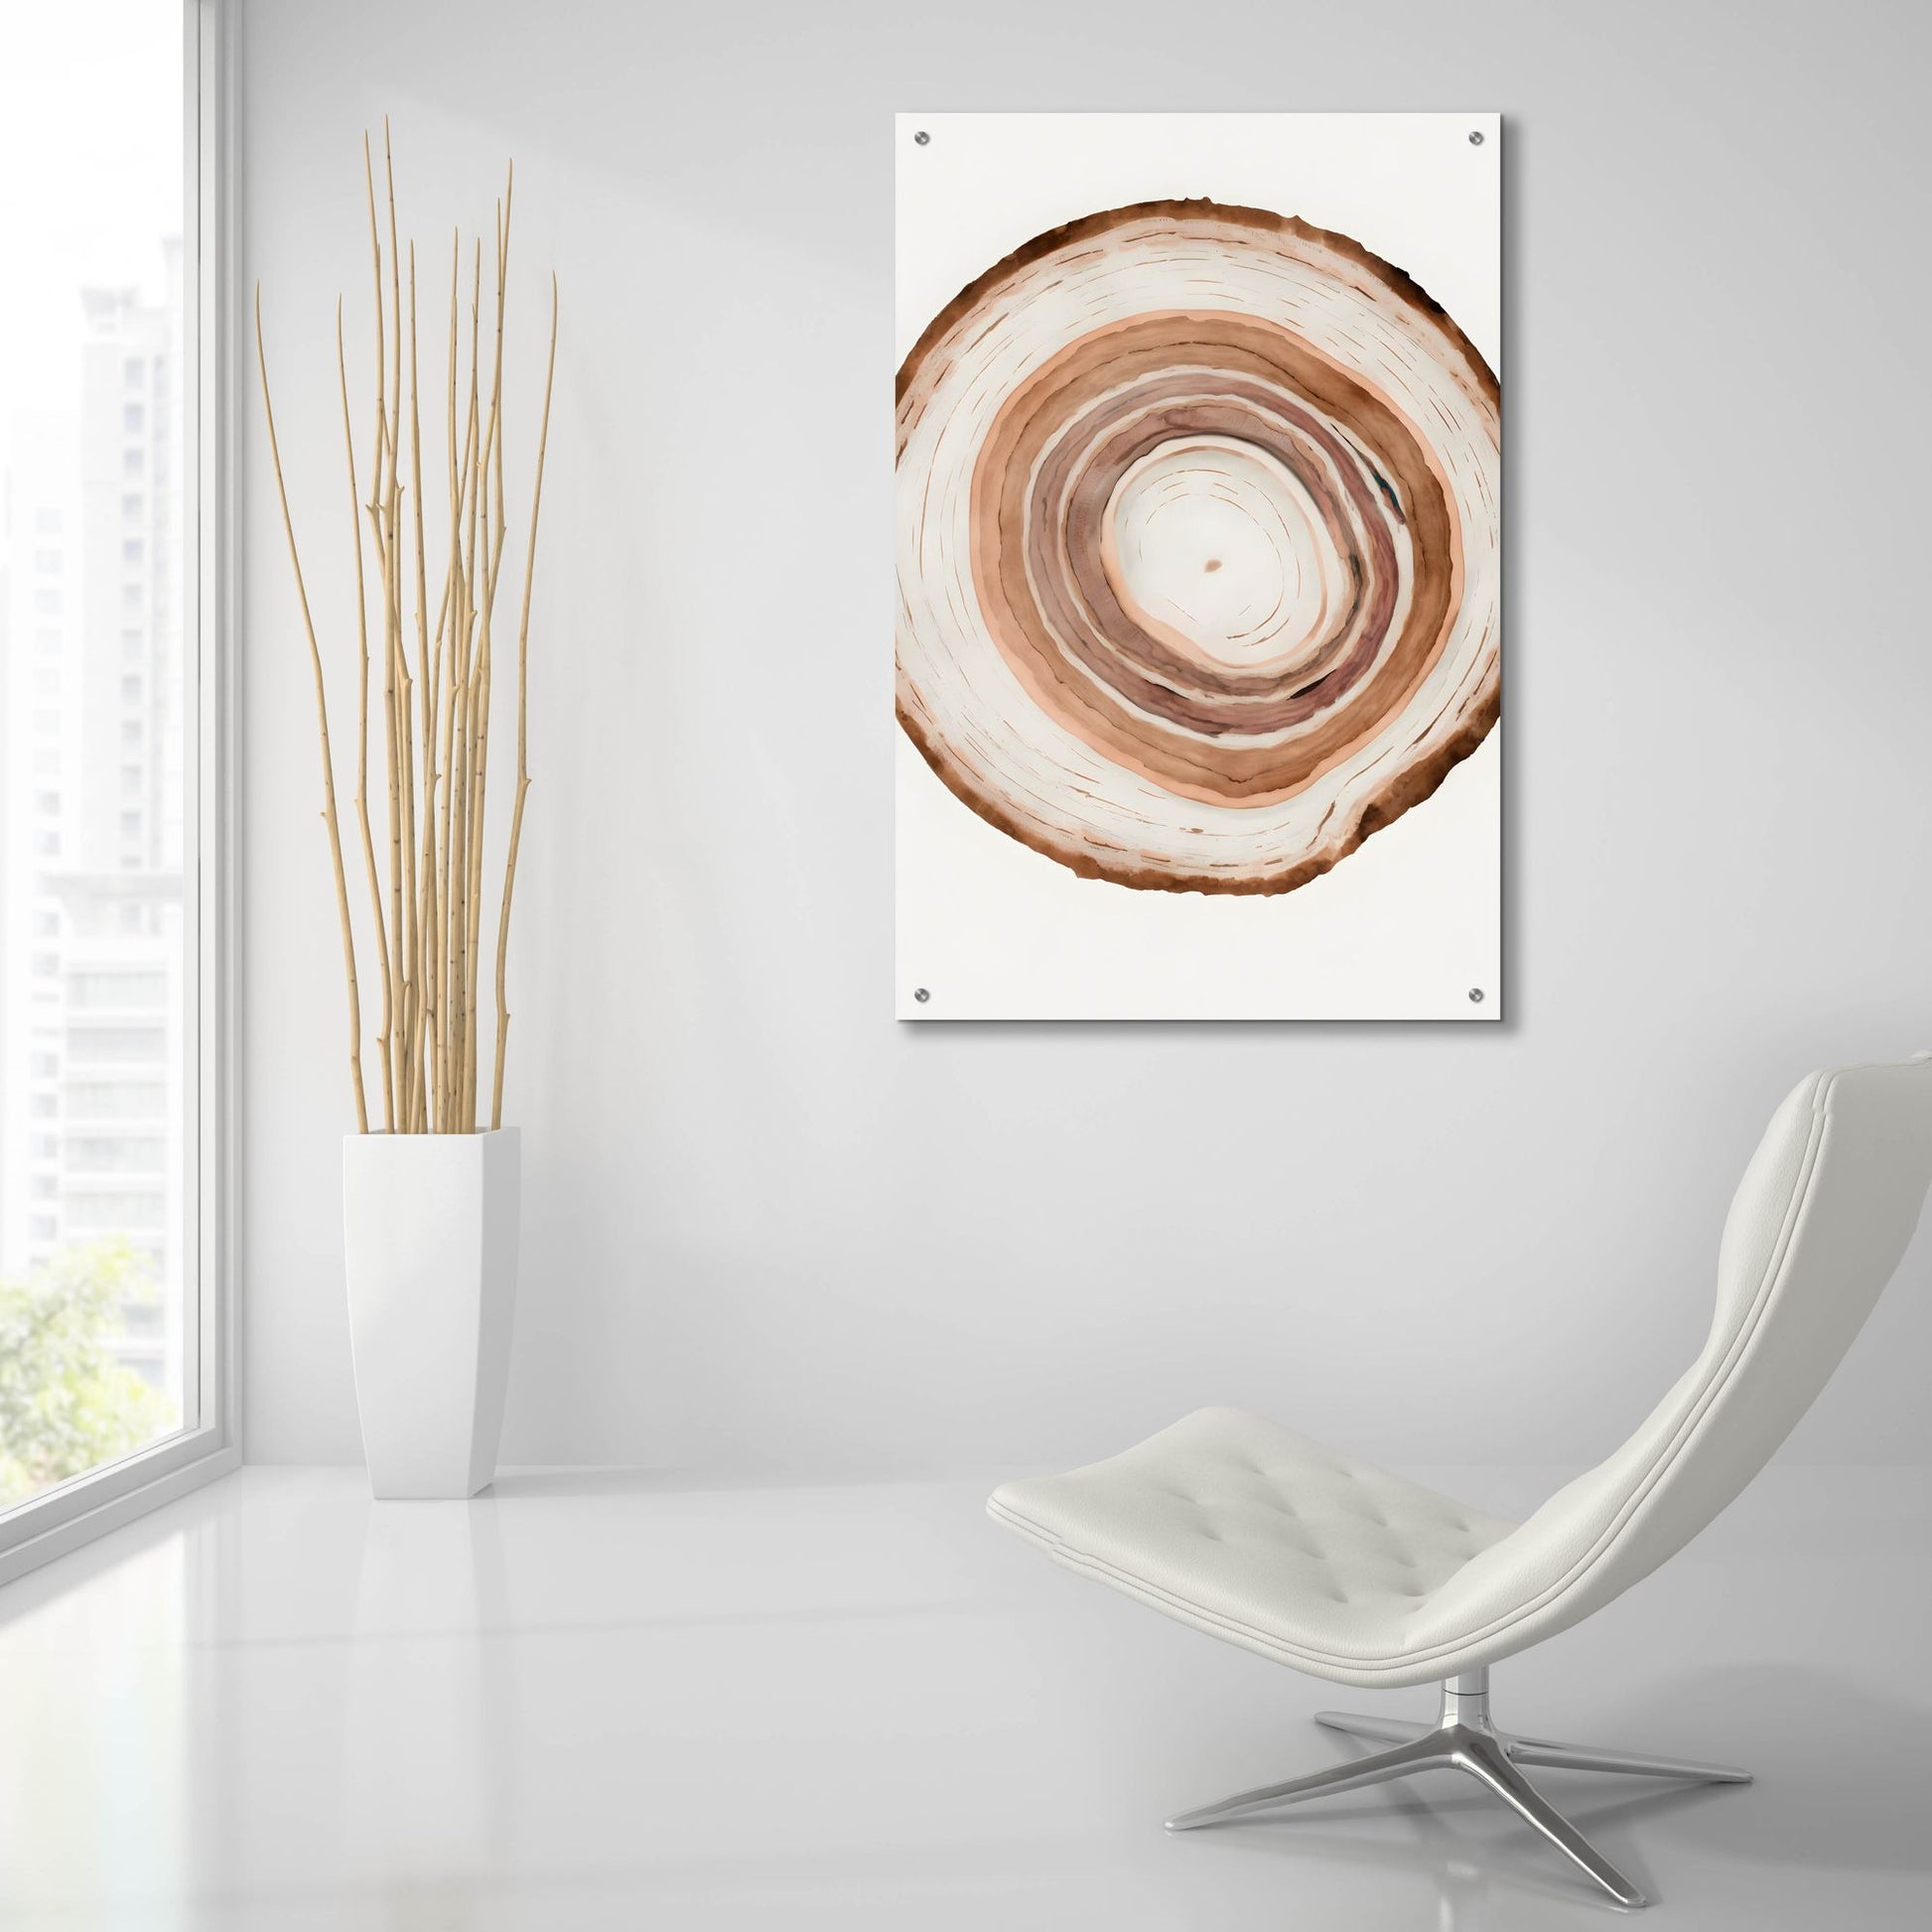 Epic Art 'Nature Inspired 6' by Petals Prints Design, Acrylic Glass Wall Art,24x36